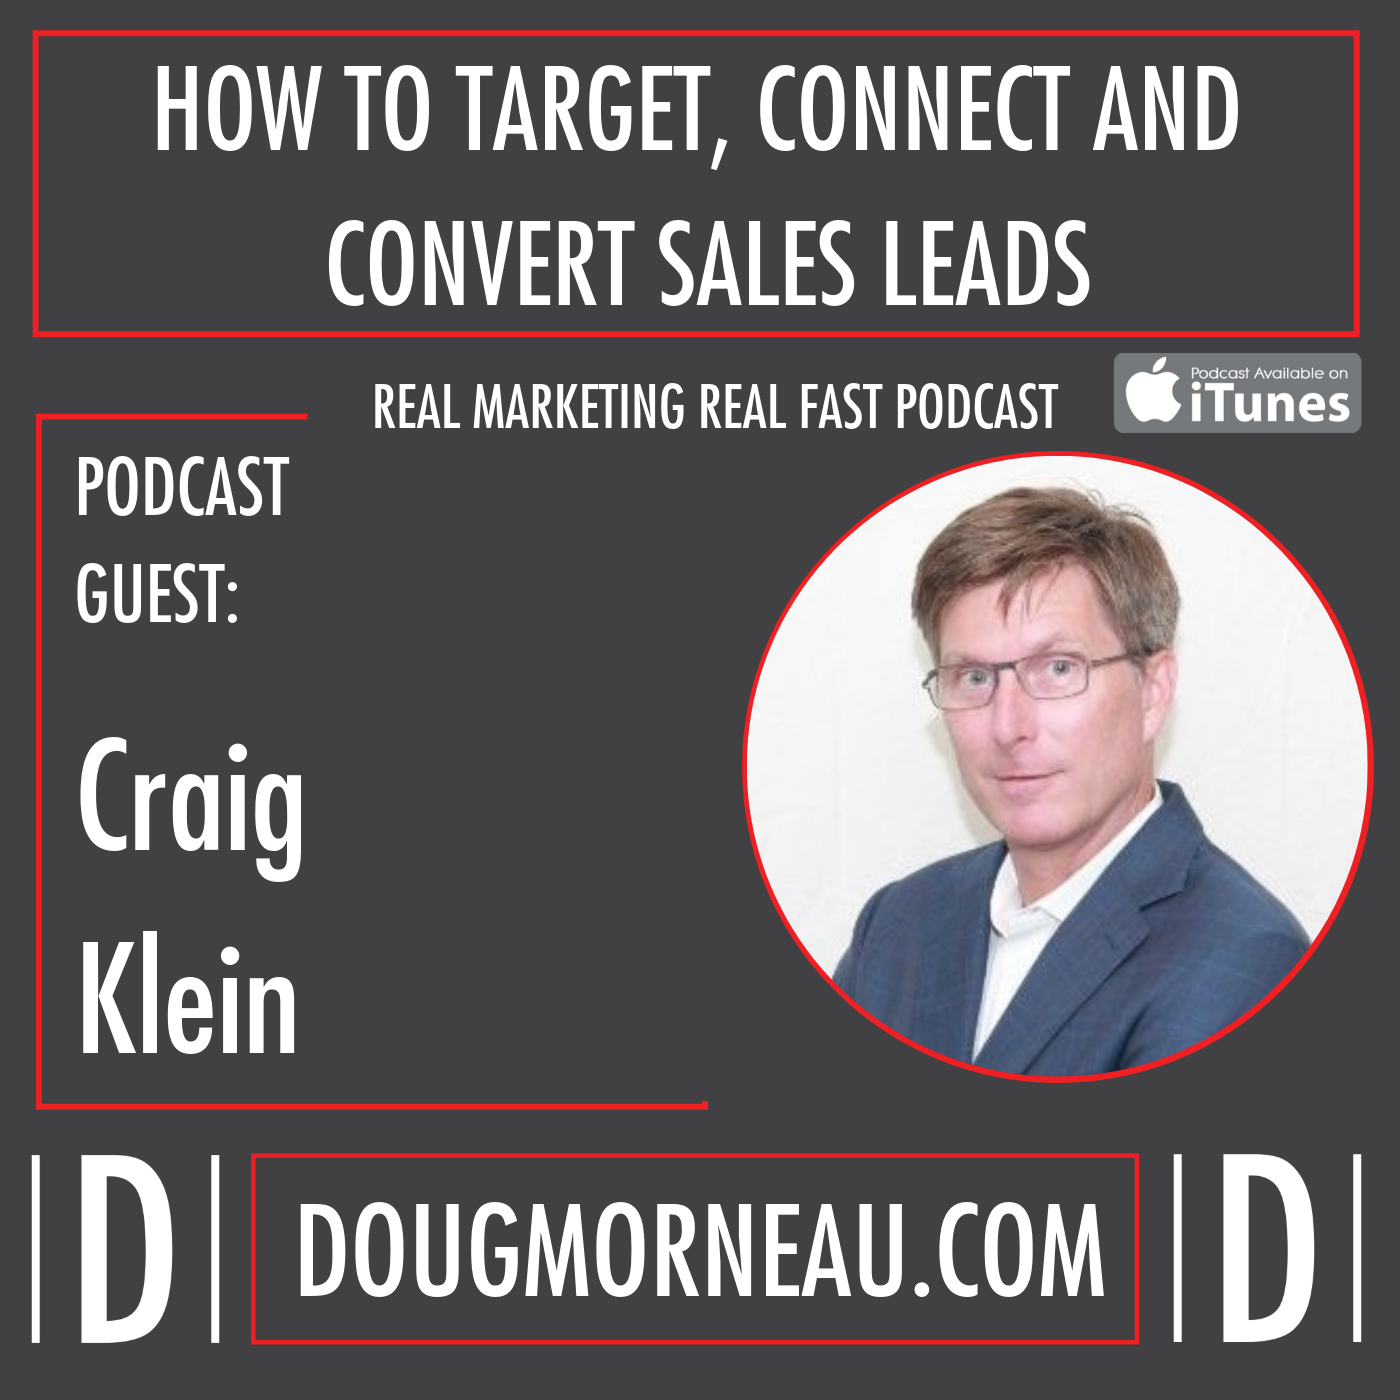 HOW TO TARGET, CONNECT AND CONVERT SALES LEADS CRAIG KLEIN - DOUG MORNEAU - REAL MARKETING REAL FAST PODCAST